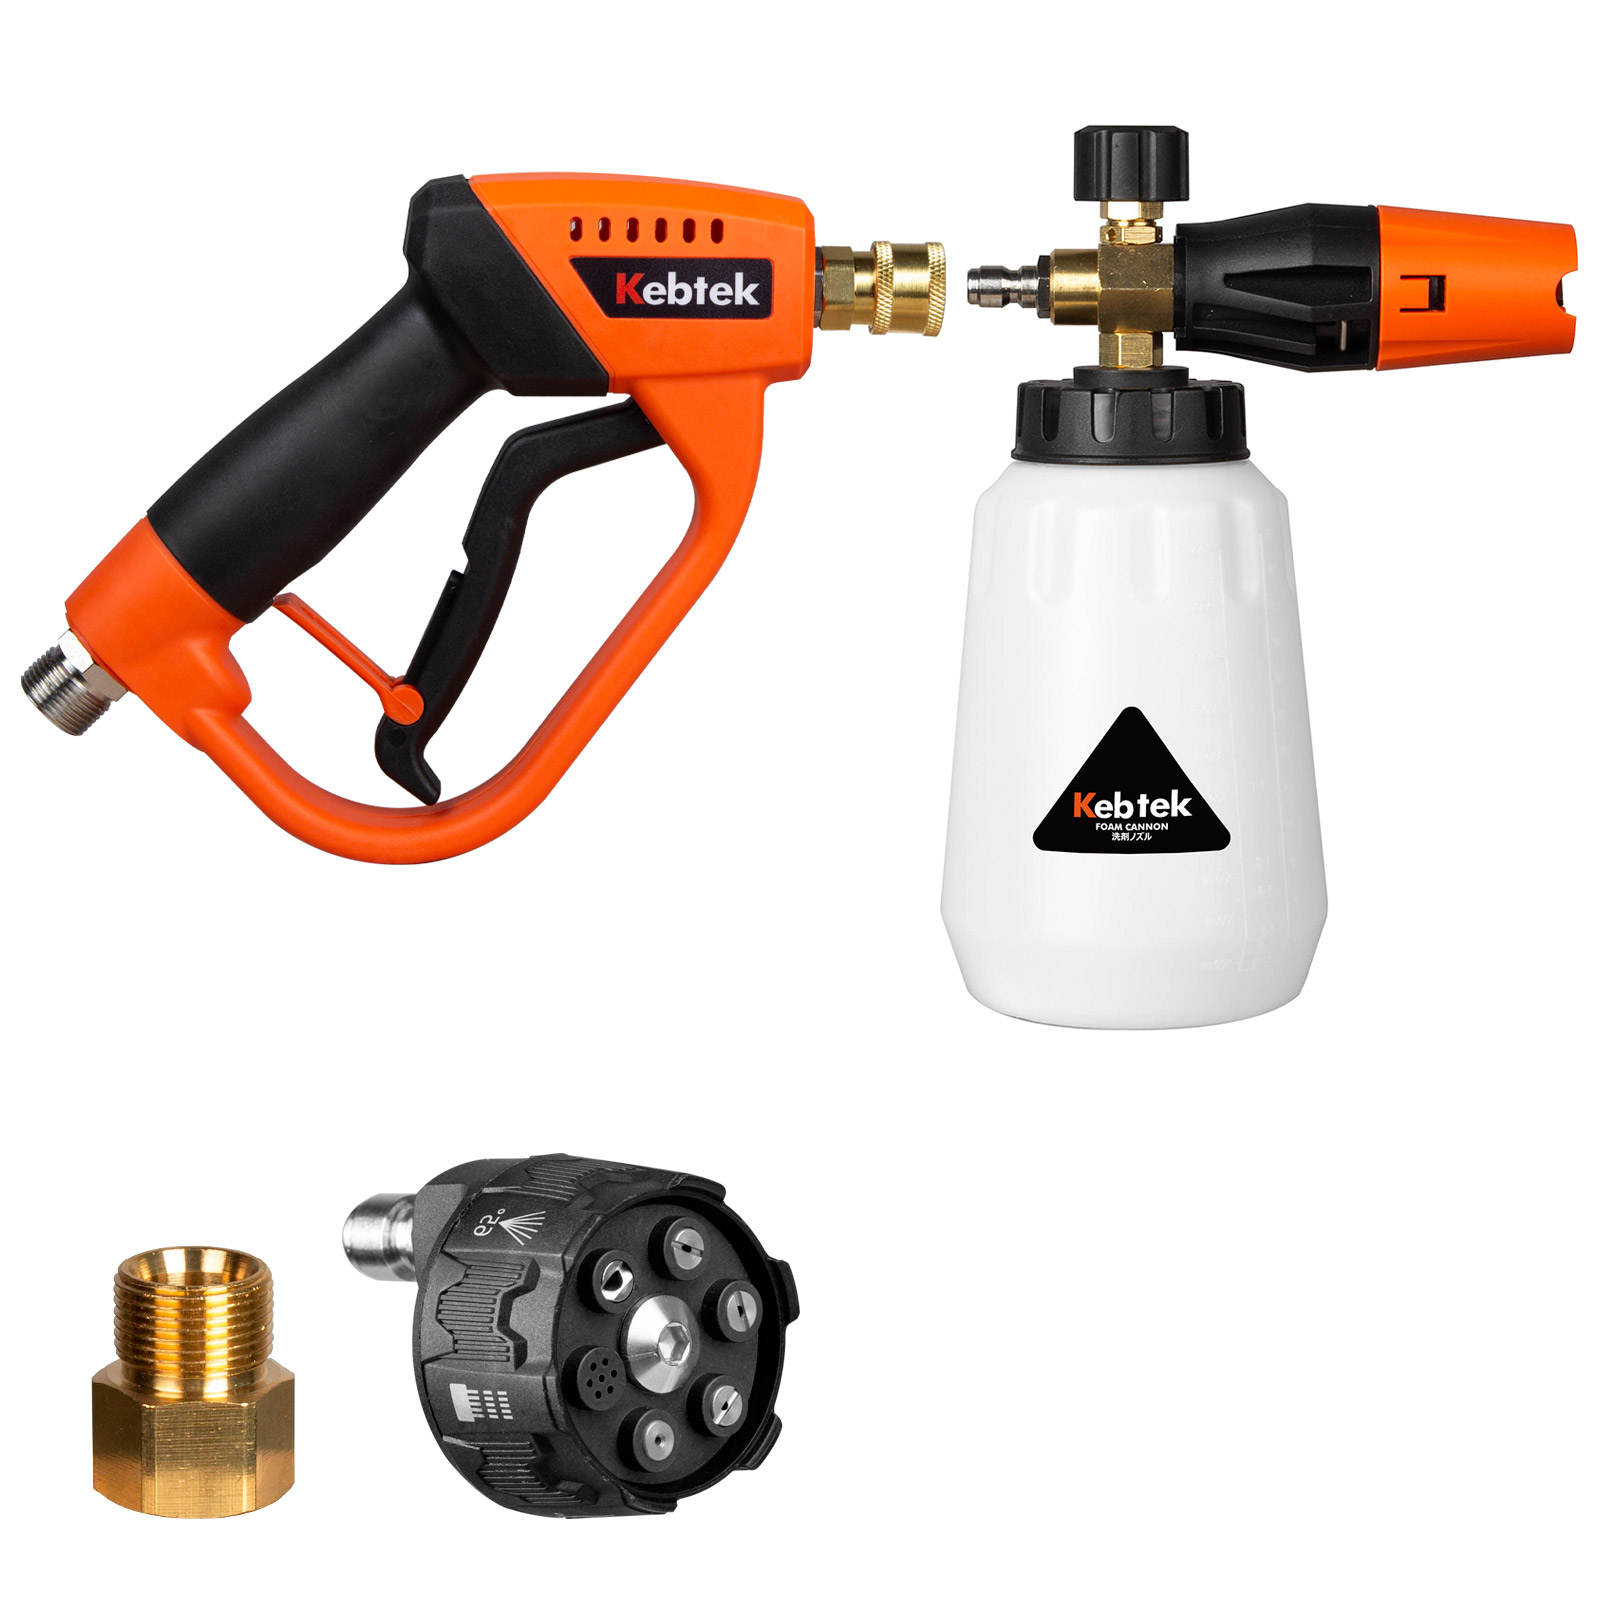 Kebtek Foam Cannon with Pressure Washer Gun 5200 PSI, Car Wash Foam Gun with Pressure Washer Quick Connect Kit and 5 Nozzle Tips, M22 and 1/4 Inch Quick Connect, 1Liter